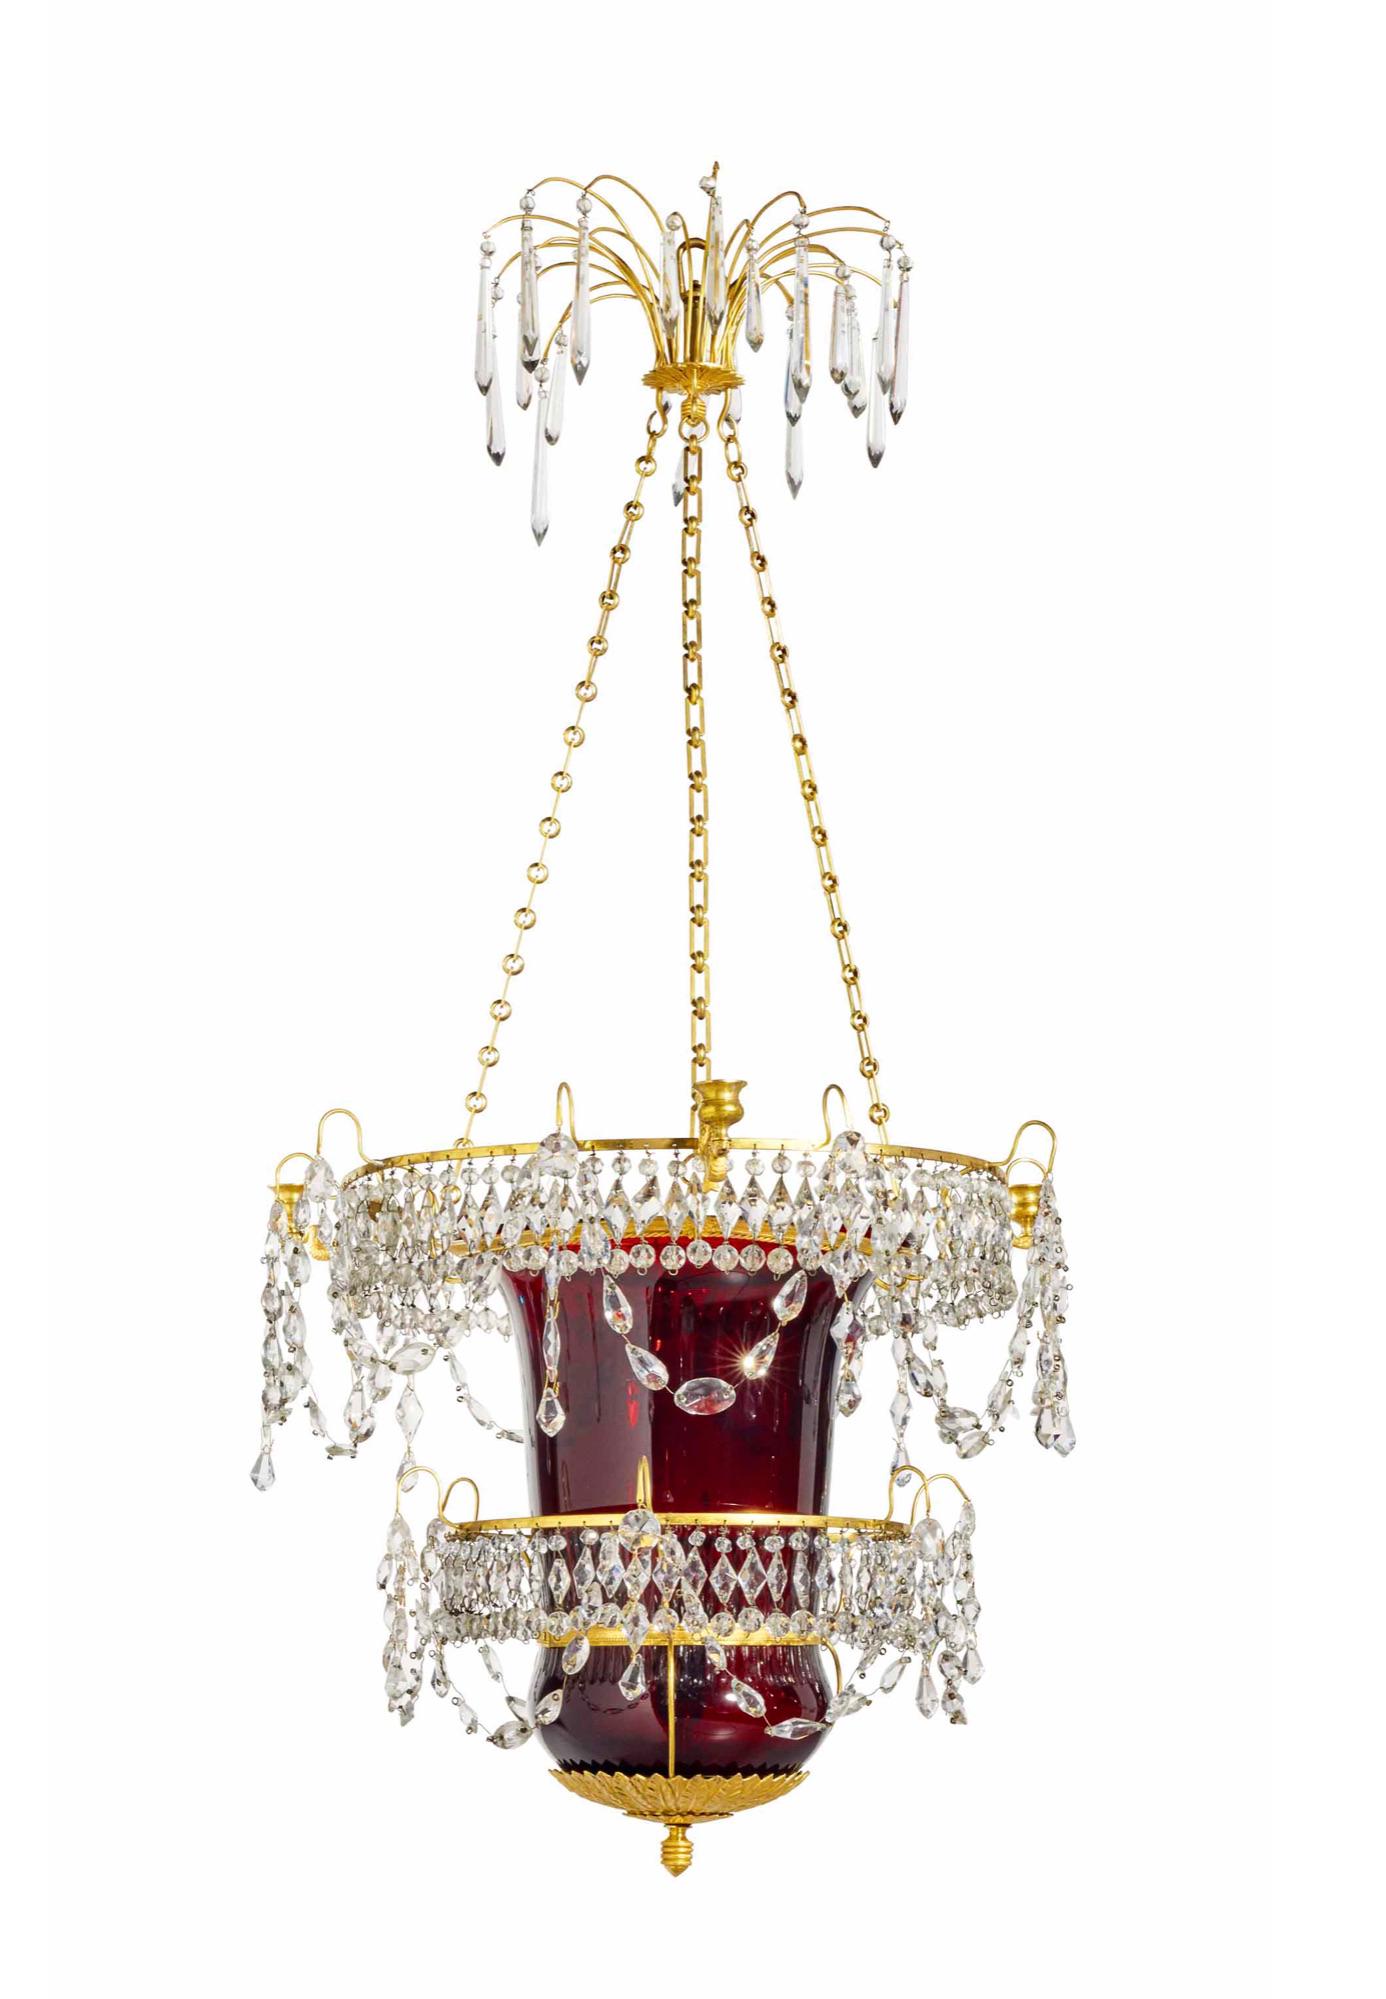 Early 19th Century Neoclassical Russian Ormolu and Ruby Glass Lantern Chandelier 1